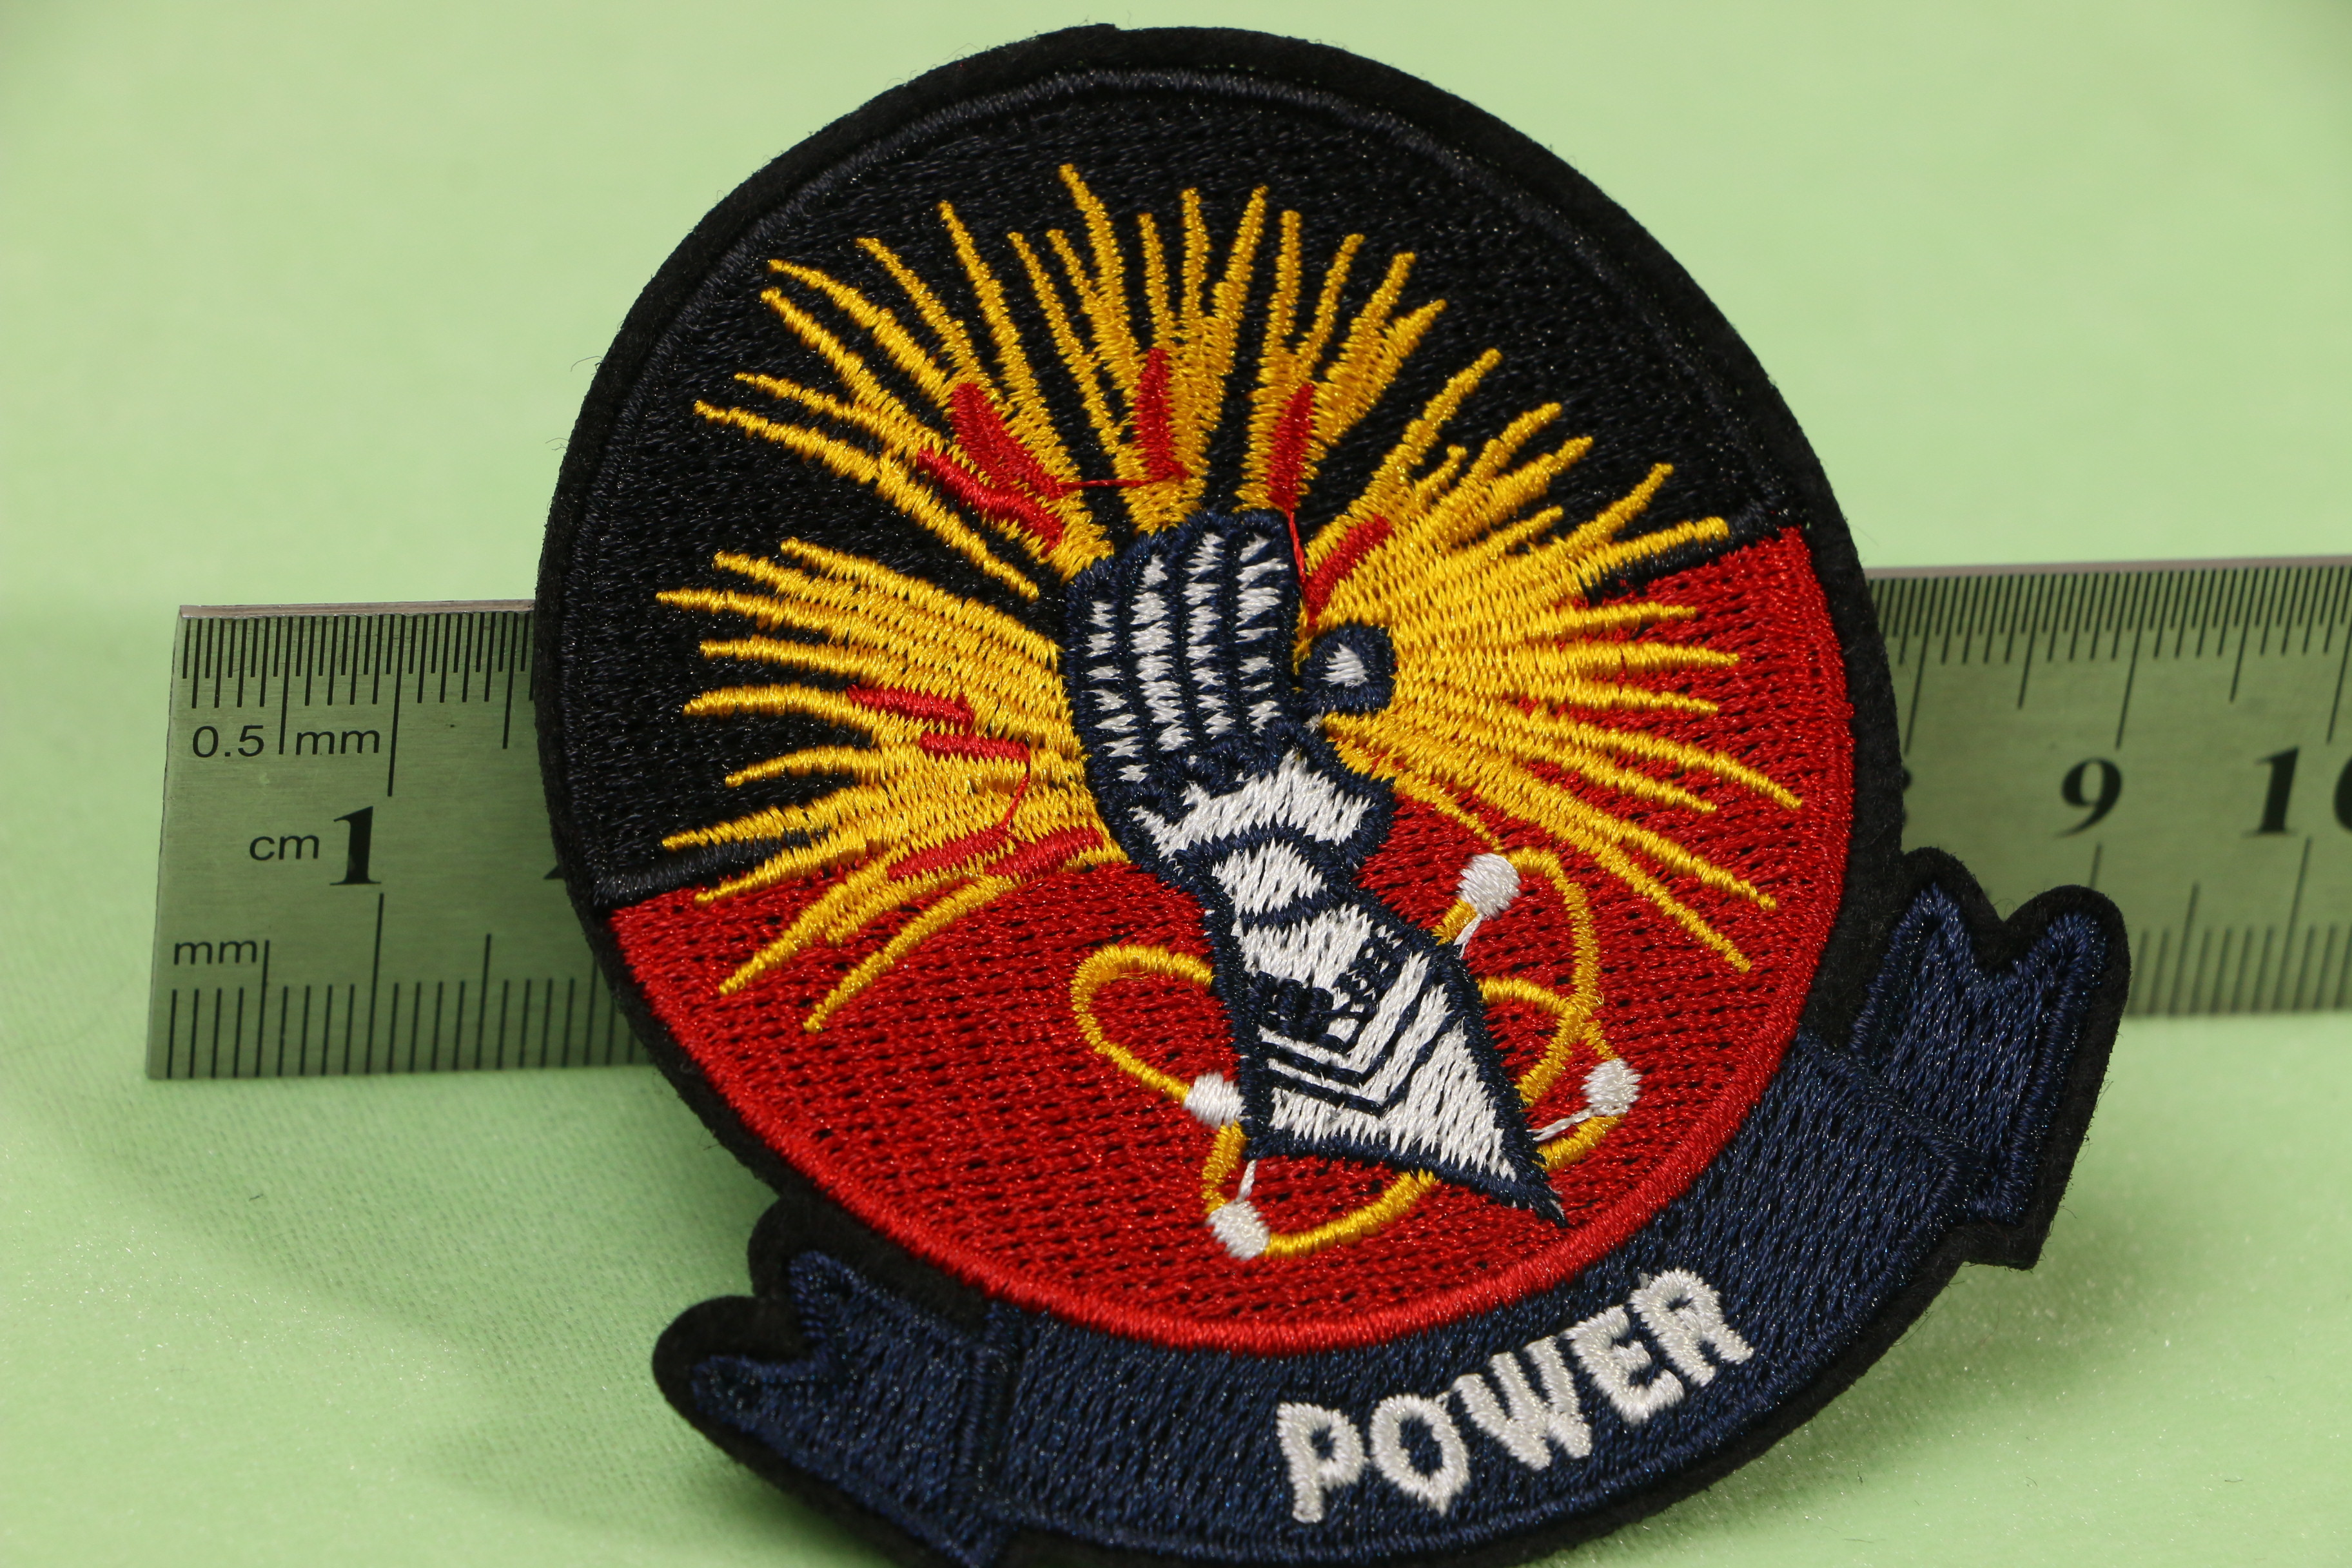  7.5x7cm Embroidered Fabric Cloth 3D Patch POWER Typeface Manufactures